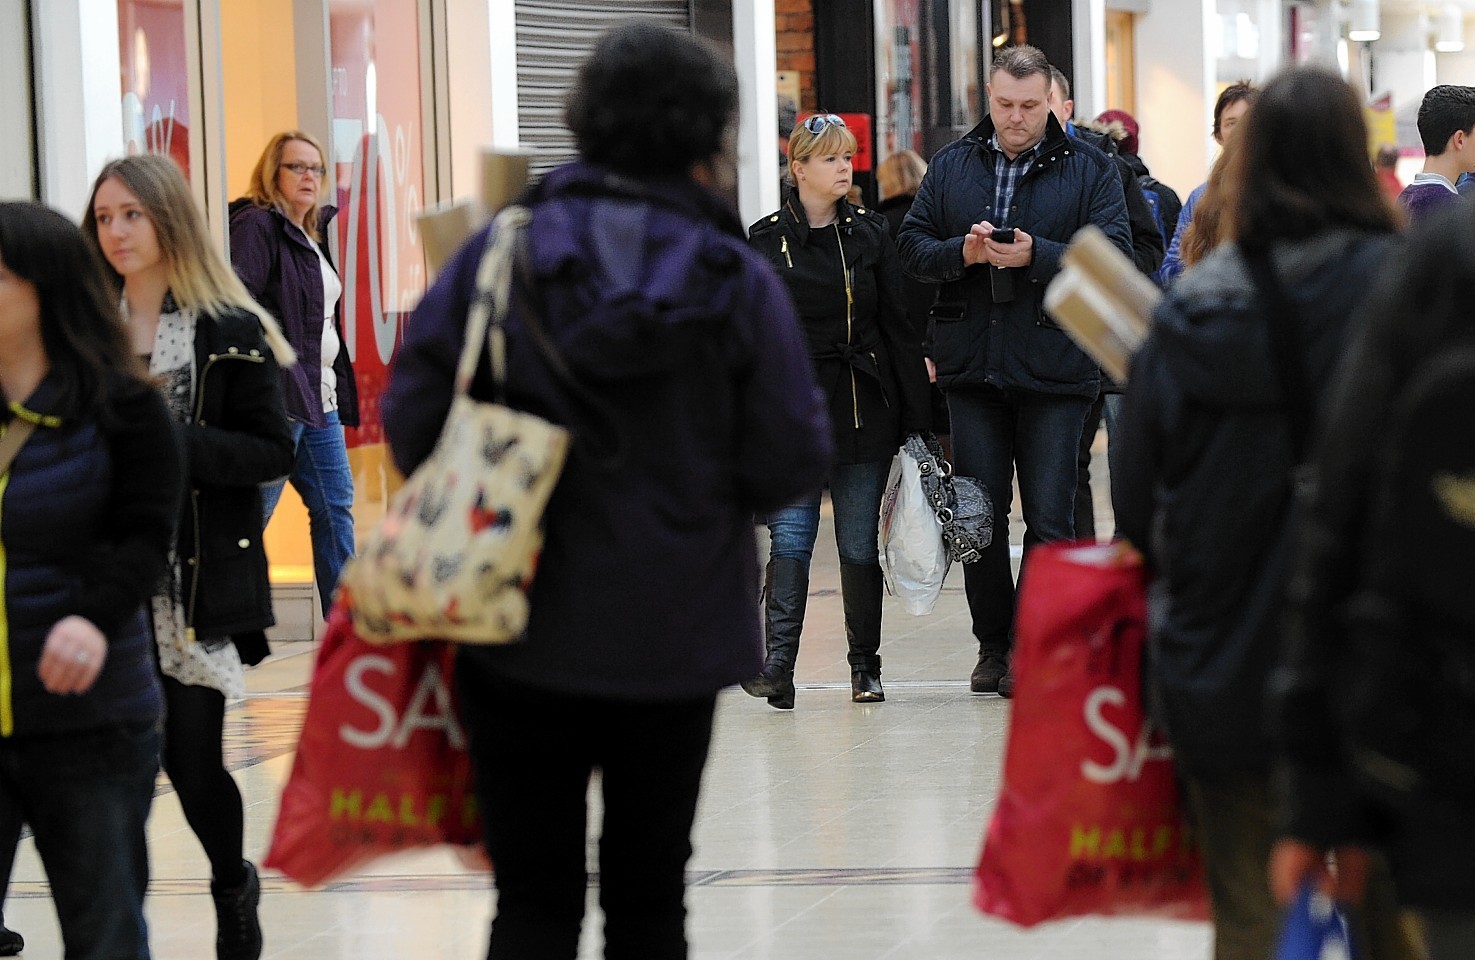 Boxing Day shoppers in the Eastgate Centre